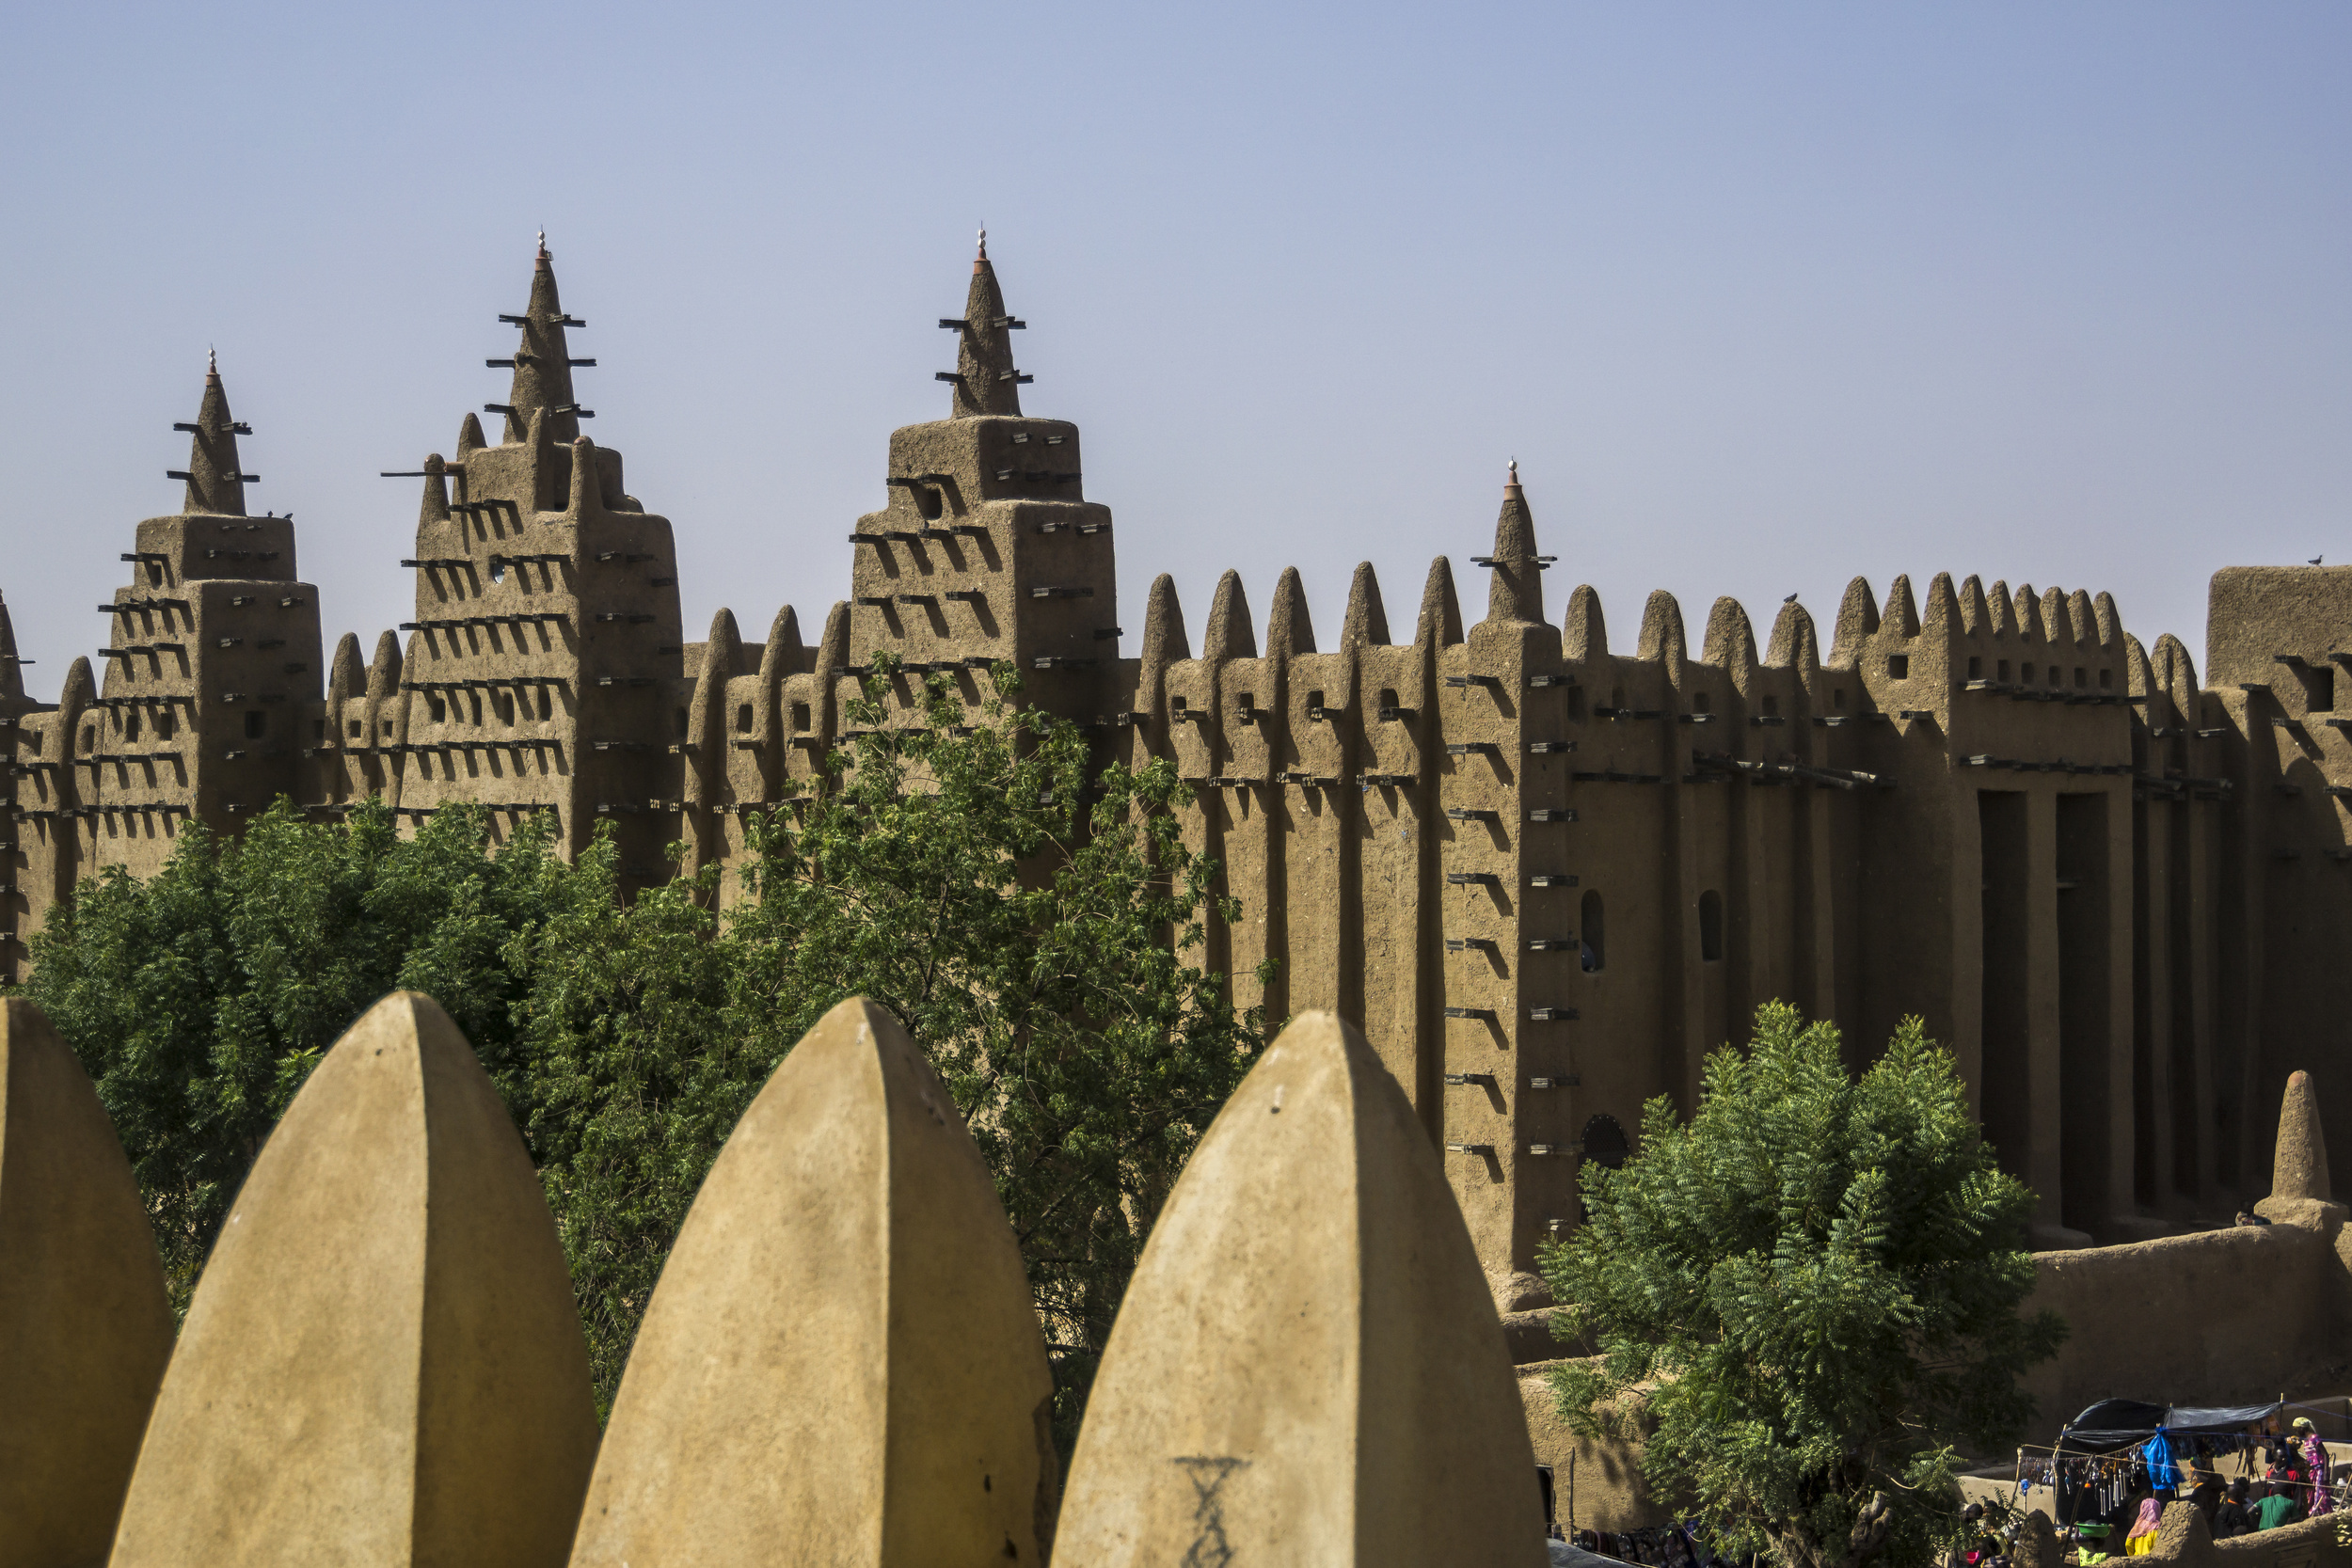 <p>Yet another former French colony, visitors to Mali will find the language very useful in most interactions. Additionally, the country is home to more than 80 other local languages.</p><p><a href='https://www.msn.com/en-us/community/channel/vid-cj9pqbr0vn9in2b6ddcd8sfgpfq6x6utp44fssrv6mc2gtybw0us'>Follow us on MSN to see more of our exclusive lifestyle content.</a></p>